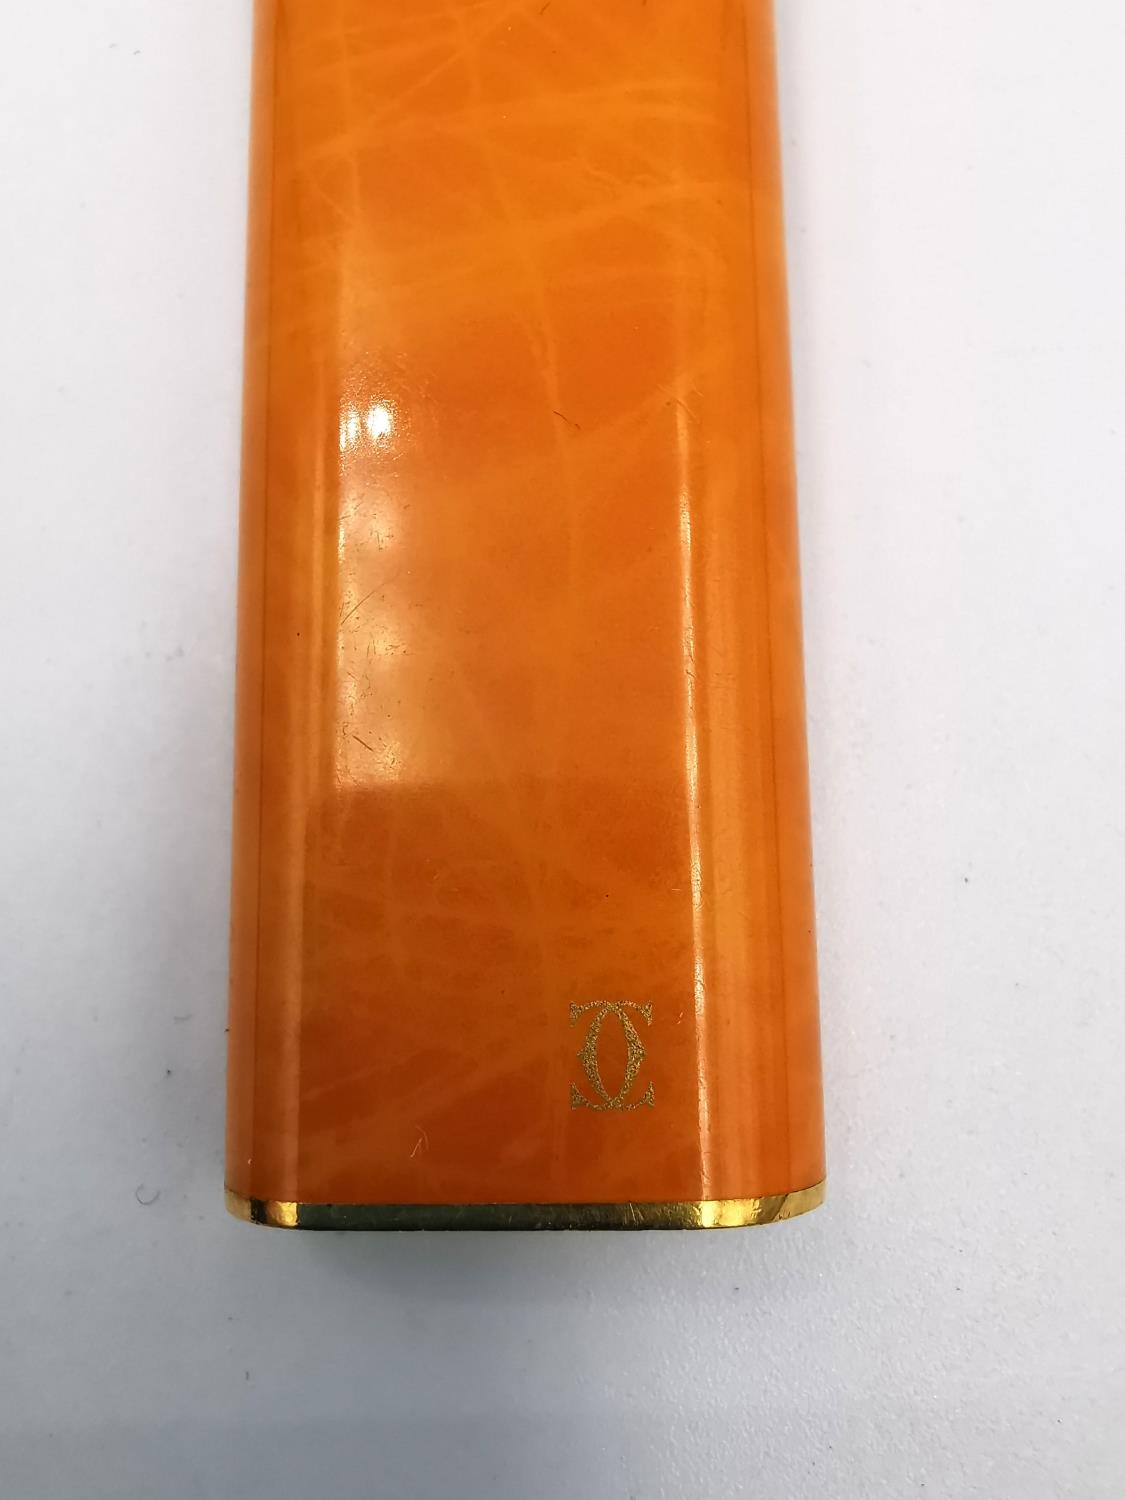 Cartier Must de Cartier lighter with three colour gold plated bands and orange marbled finish. - Image 4 of 7